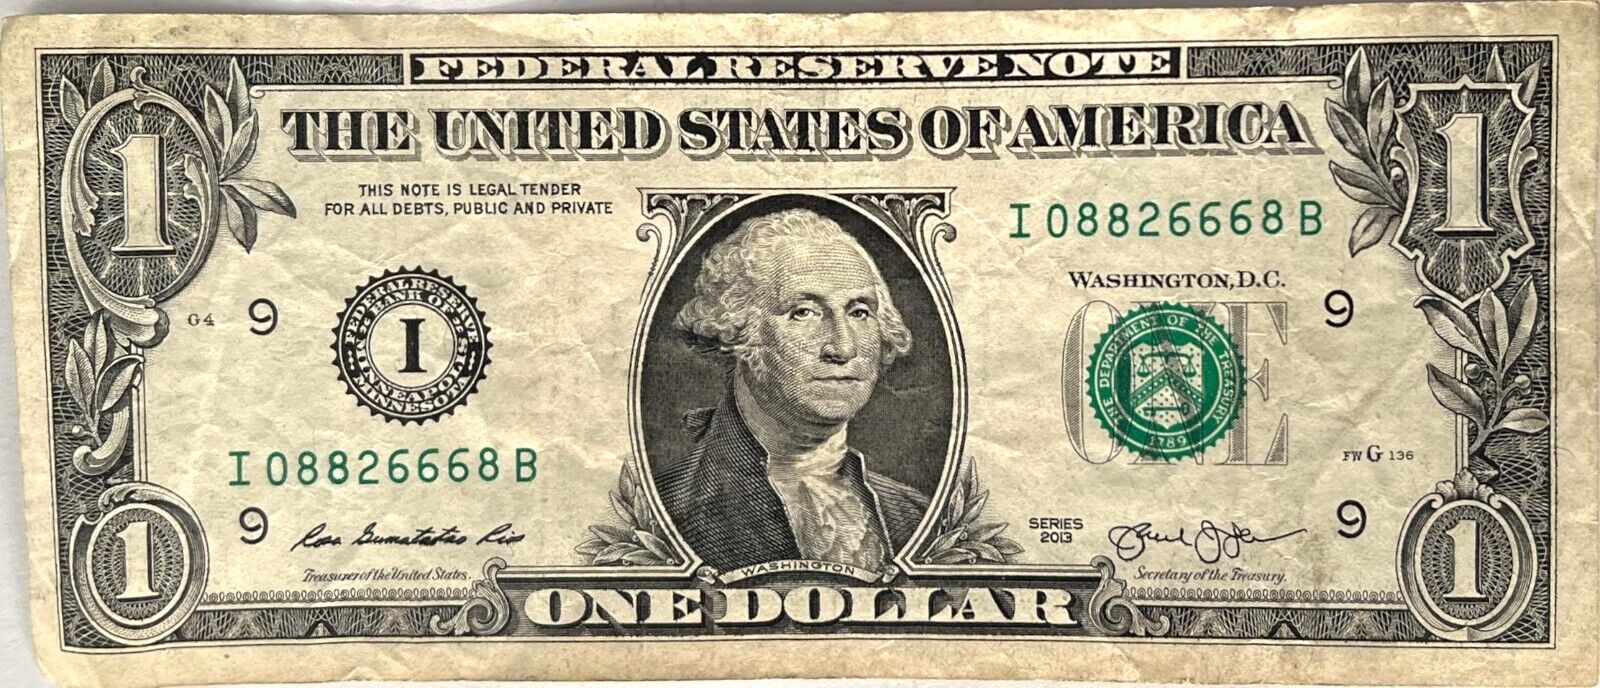 Primary image for $1 One Dollar Bill 08826668, Evil number of the beast Satan Lucifer 666